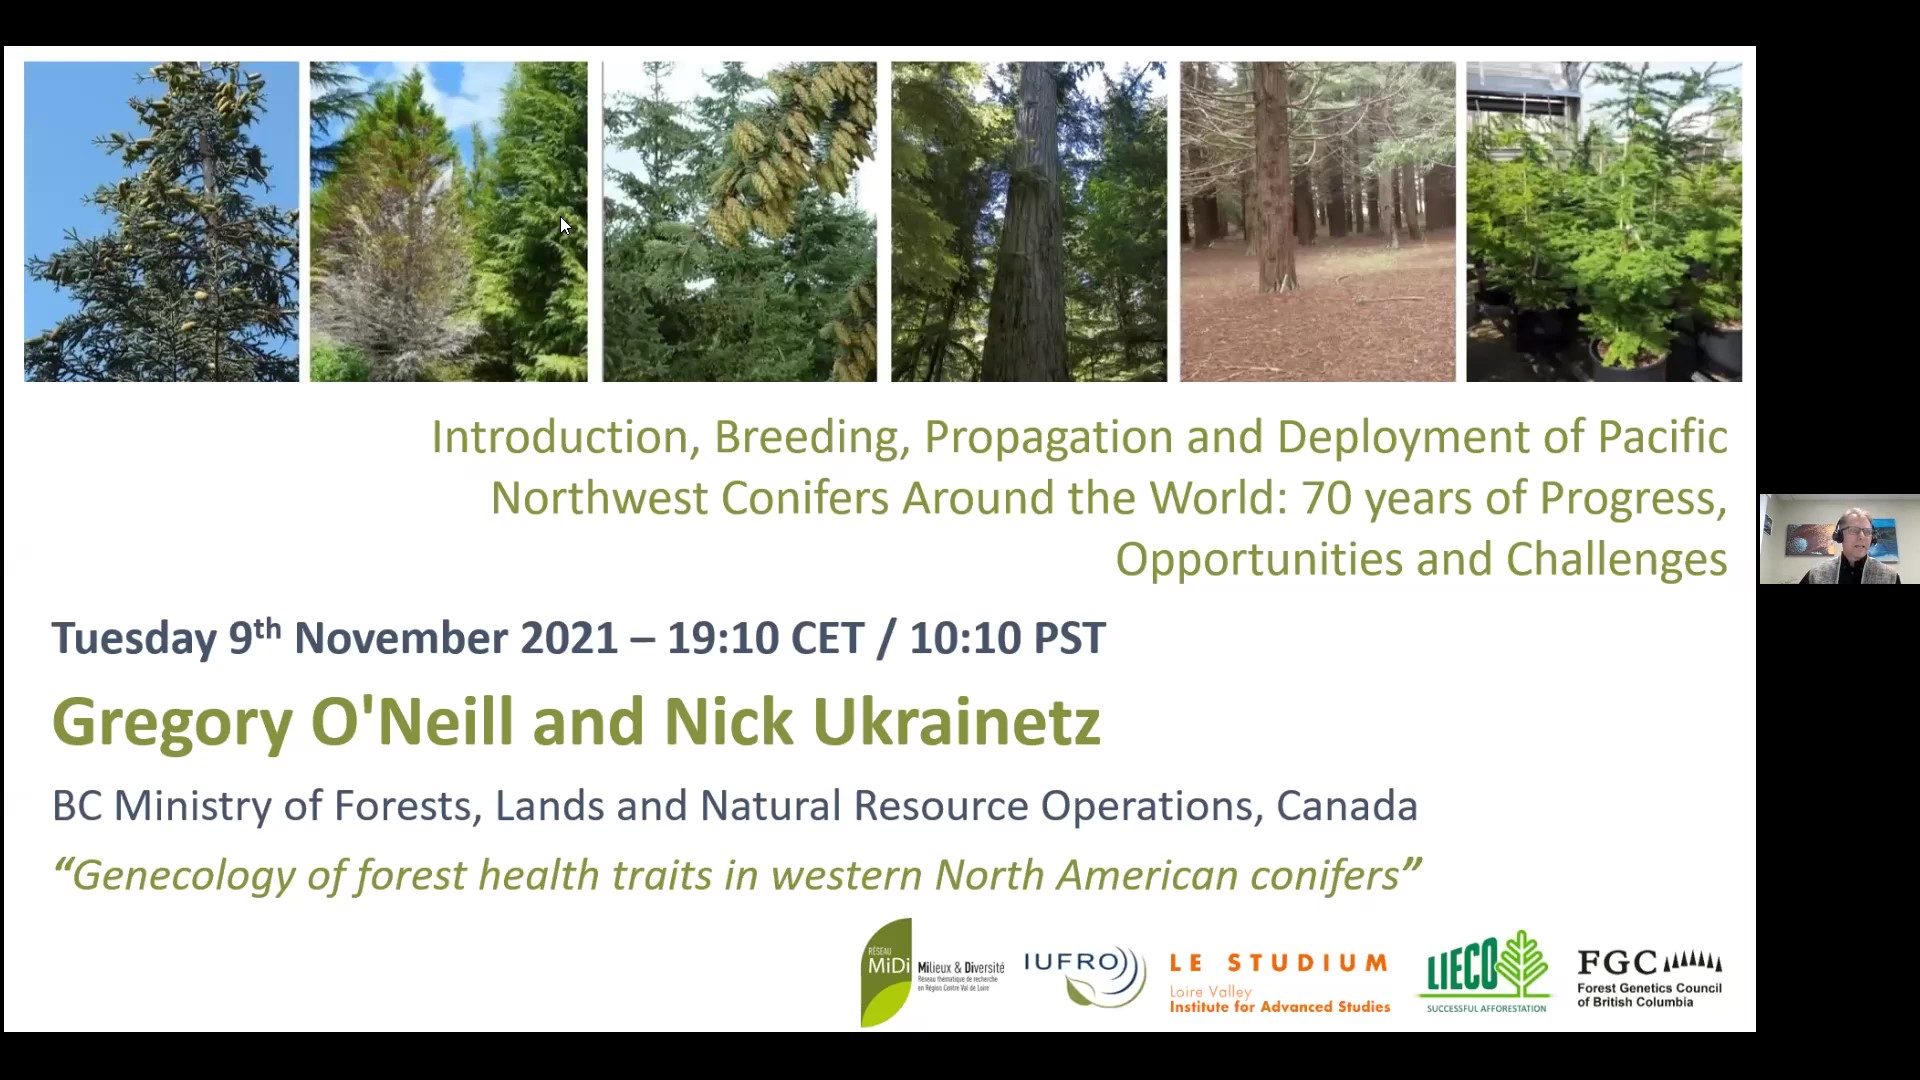 Genecology forest health traits in western North American conifers - Gregory O'Neill